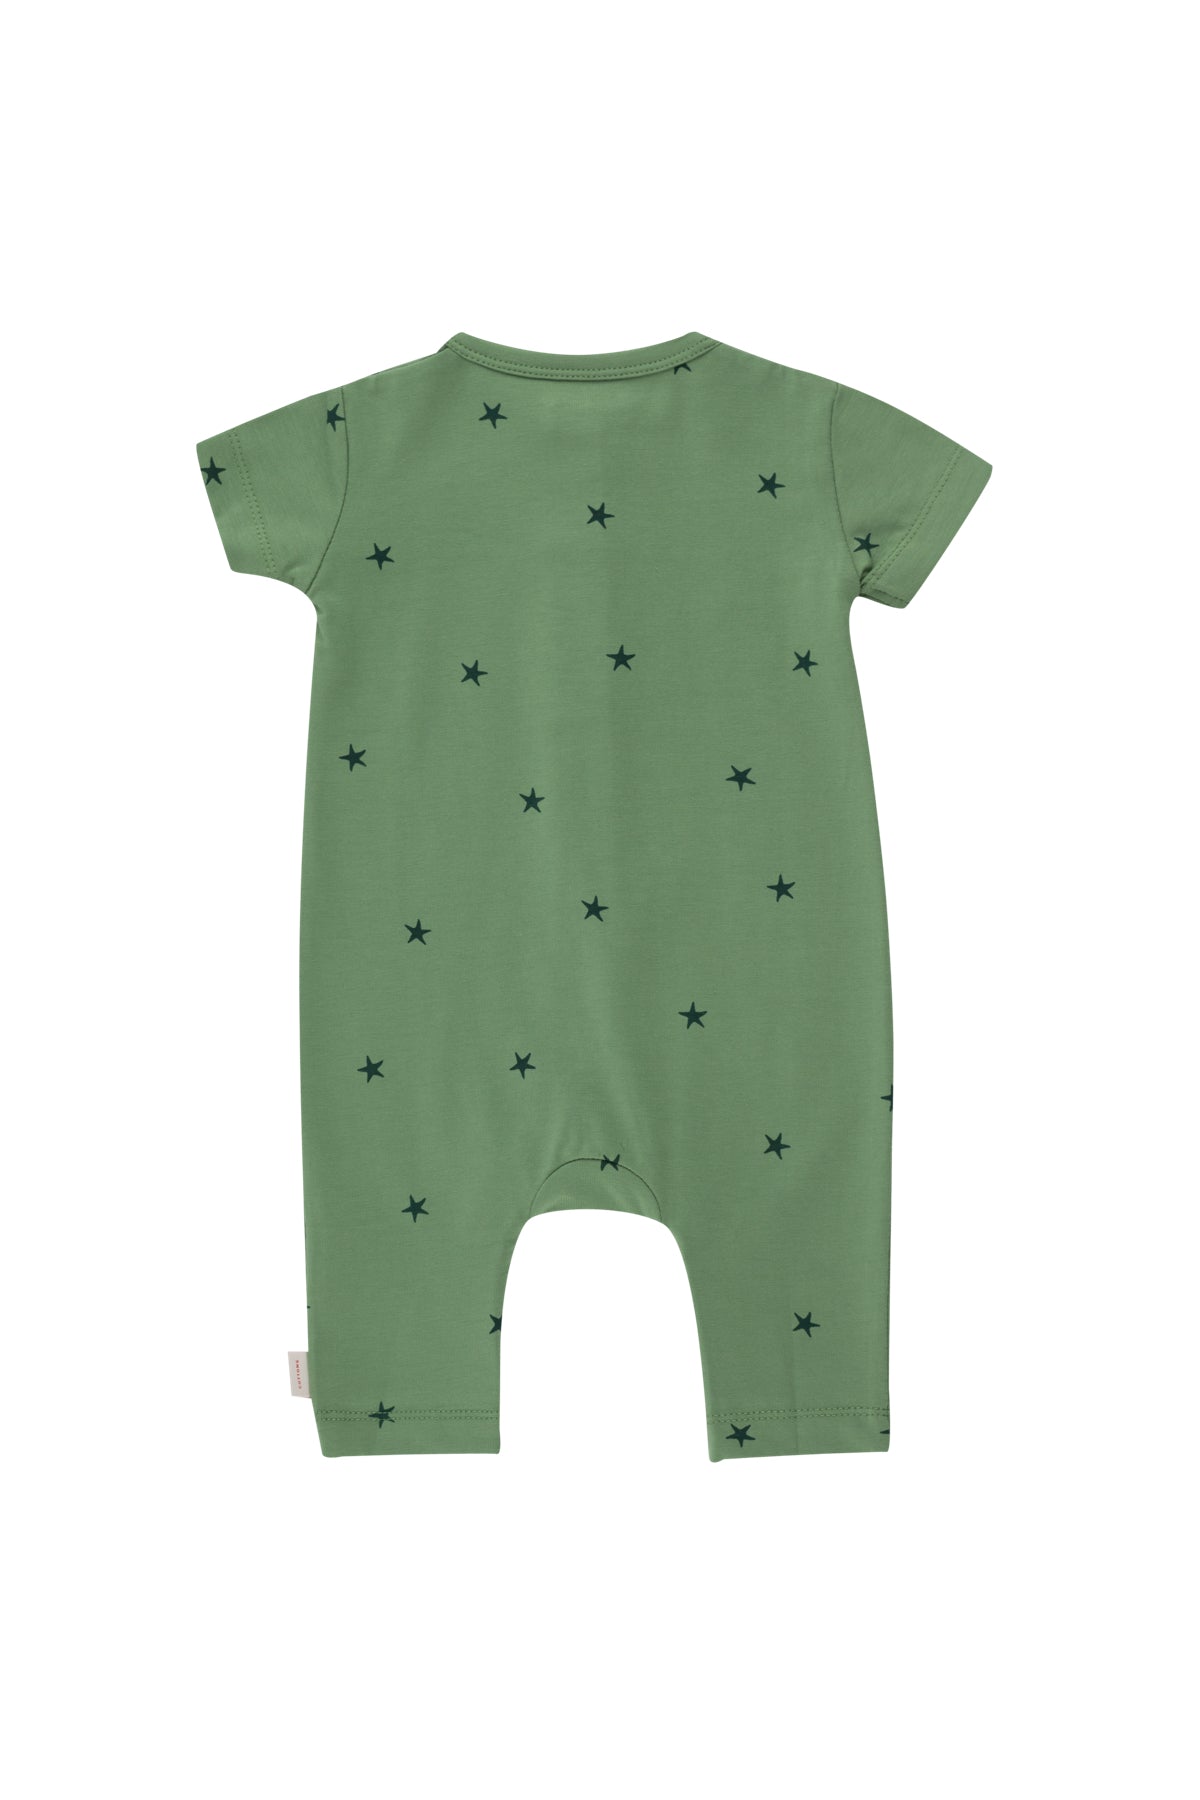 Tiny Cottons Starfish One Piece - Green/Ink Blue